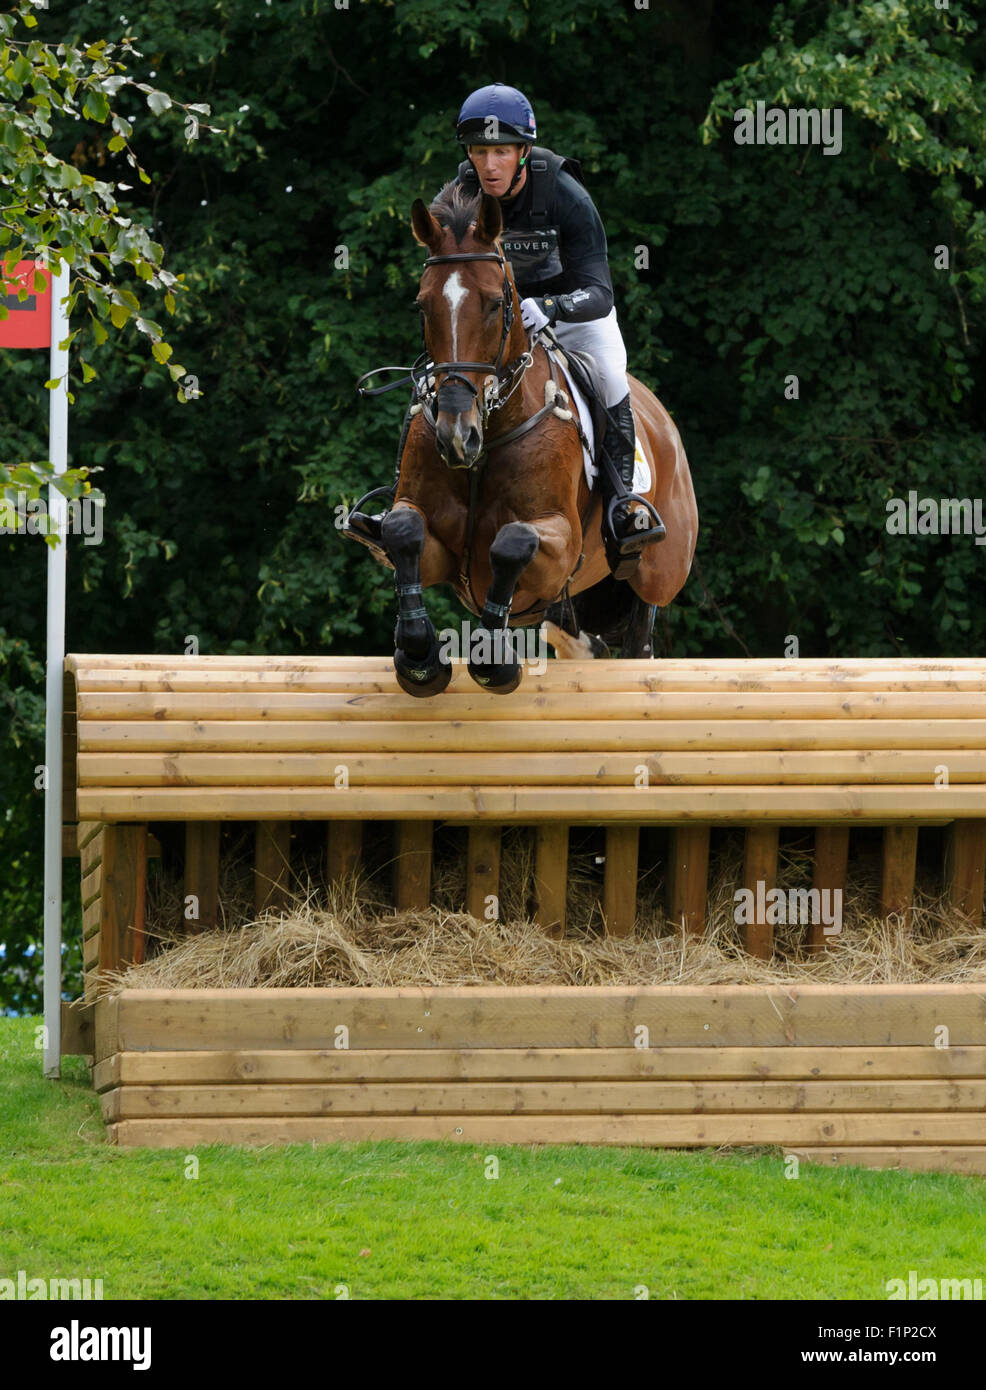 Stamford, Lincs, UK. 5th September, 2015. Oliver Townend and DROMGURRIHY BLUE are the top British combination - Cross Country Phase - Land Rover Burghley Horse Trials, 5th September 2015. Credit:  Nico Morgan/Alamy Live News Stock Photo